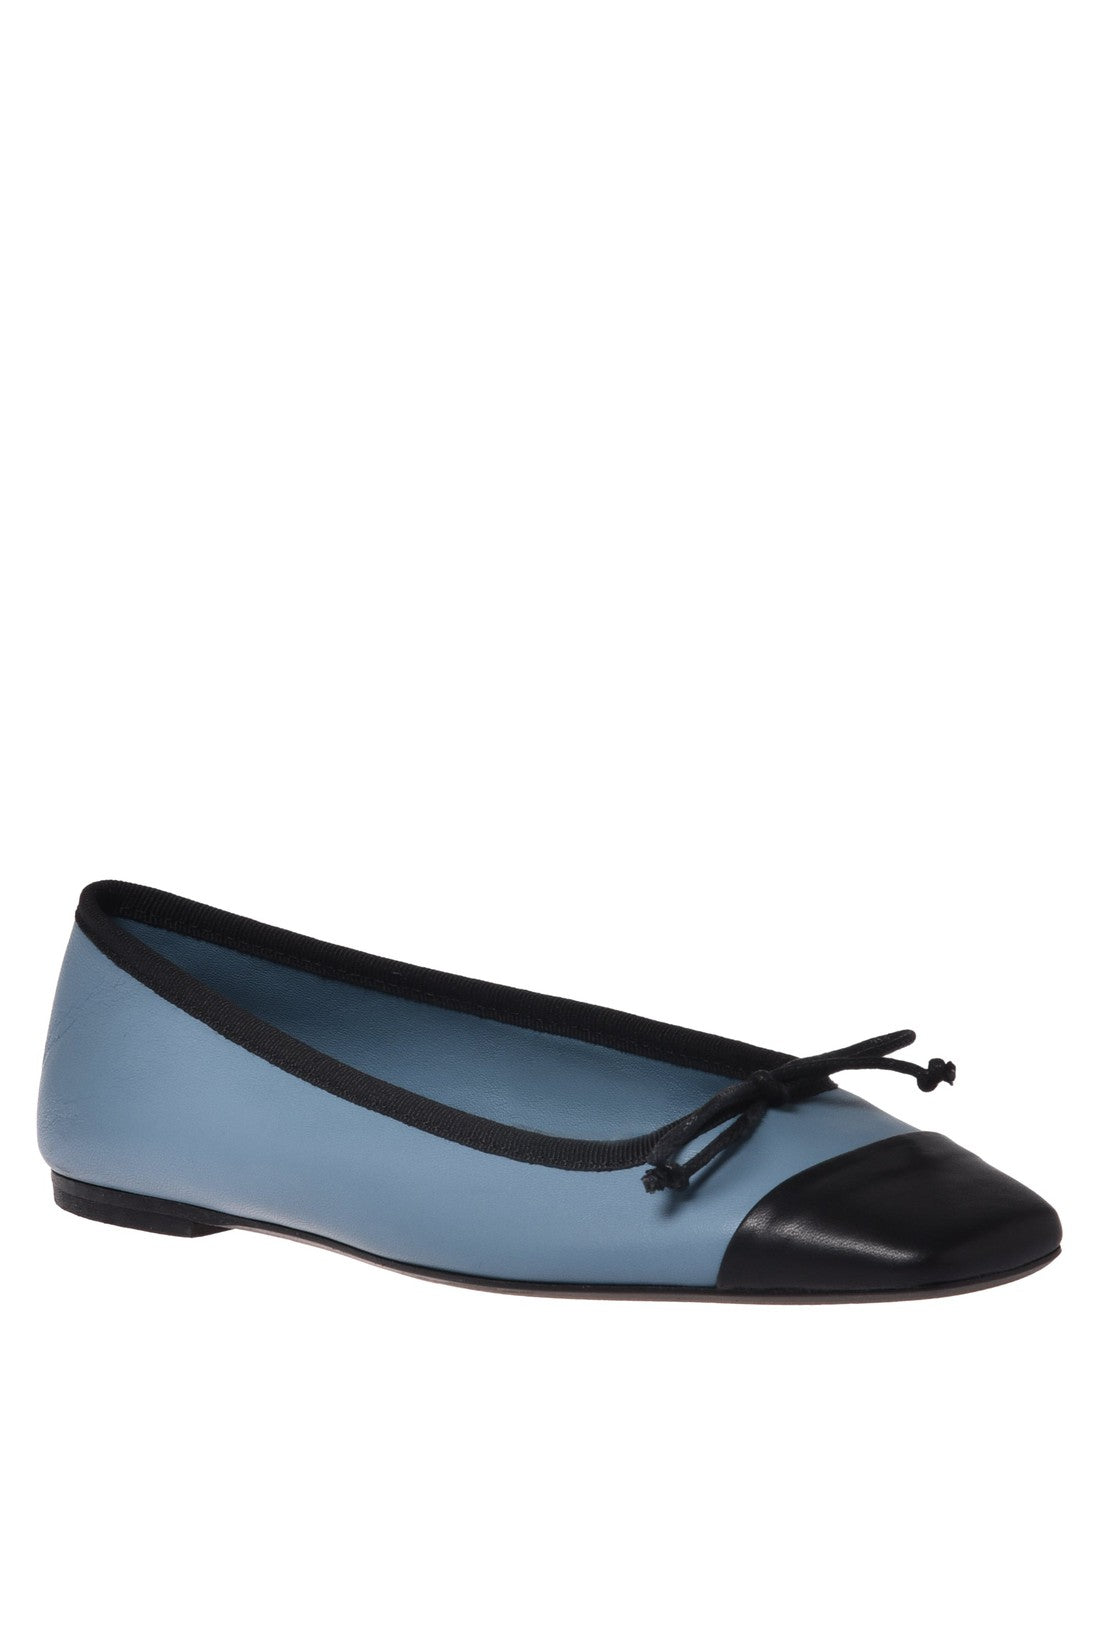 Ballerina pump in black and blue nappa leather